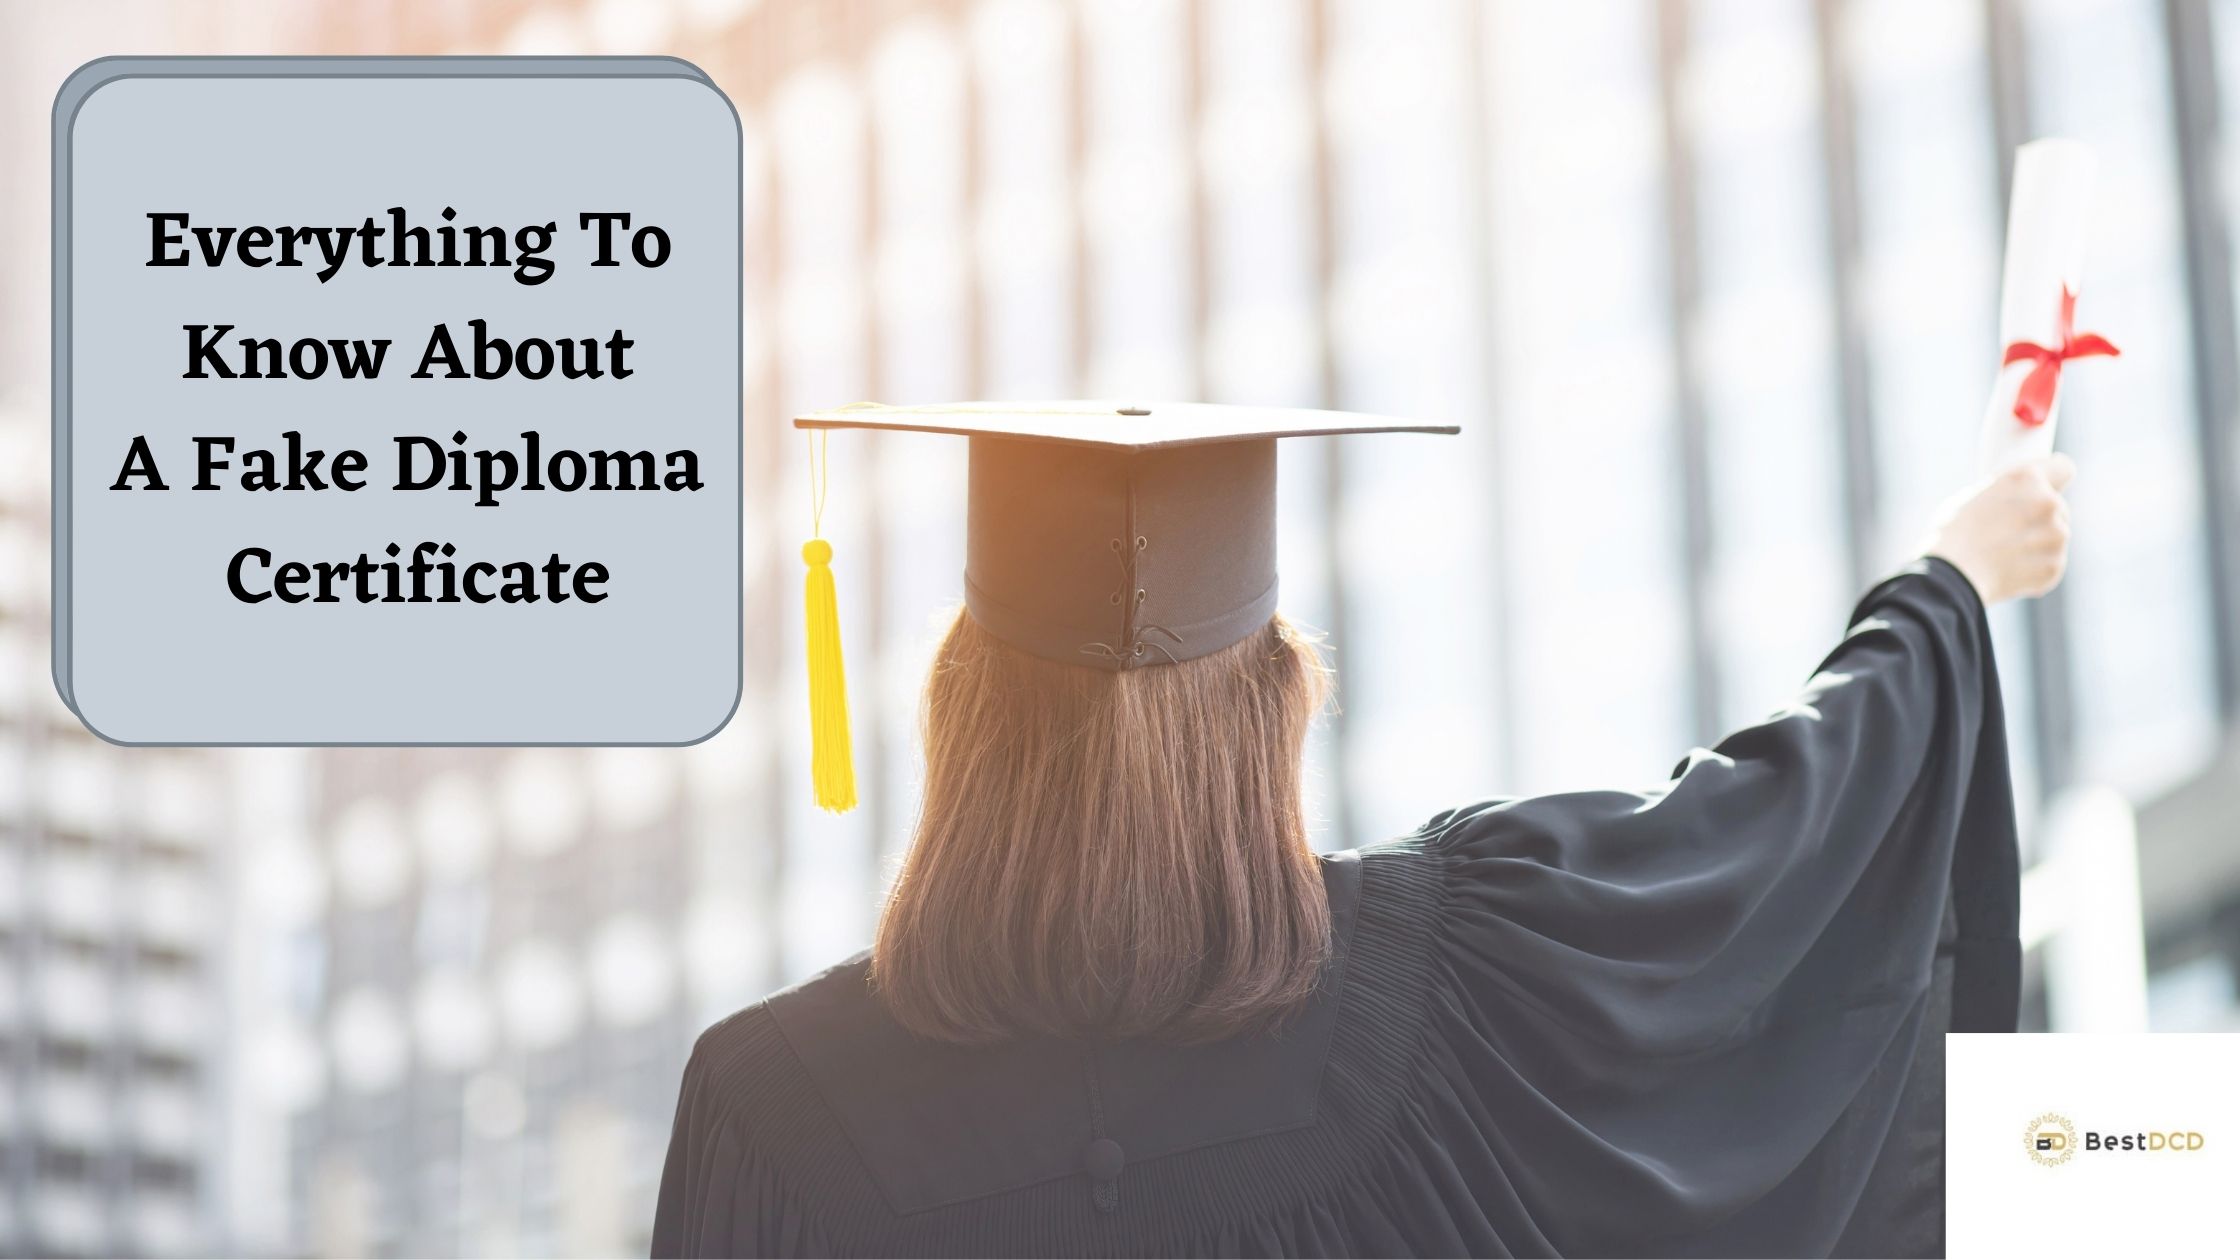 Everything To Know About A Fake Diploma Certificate